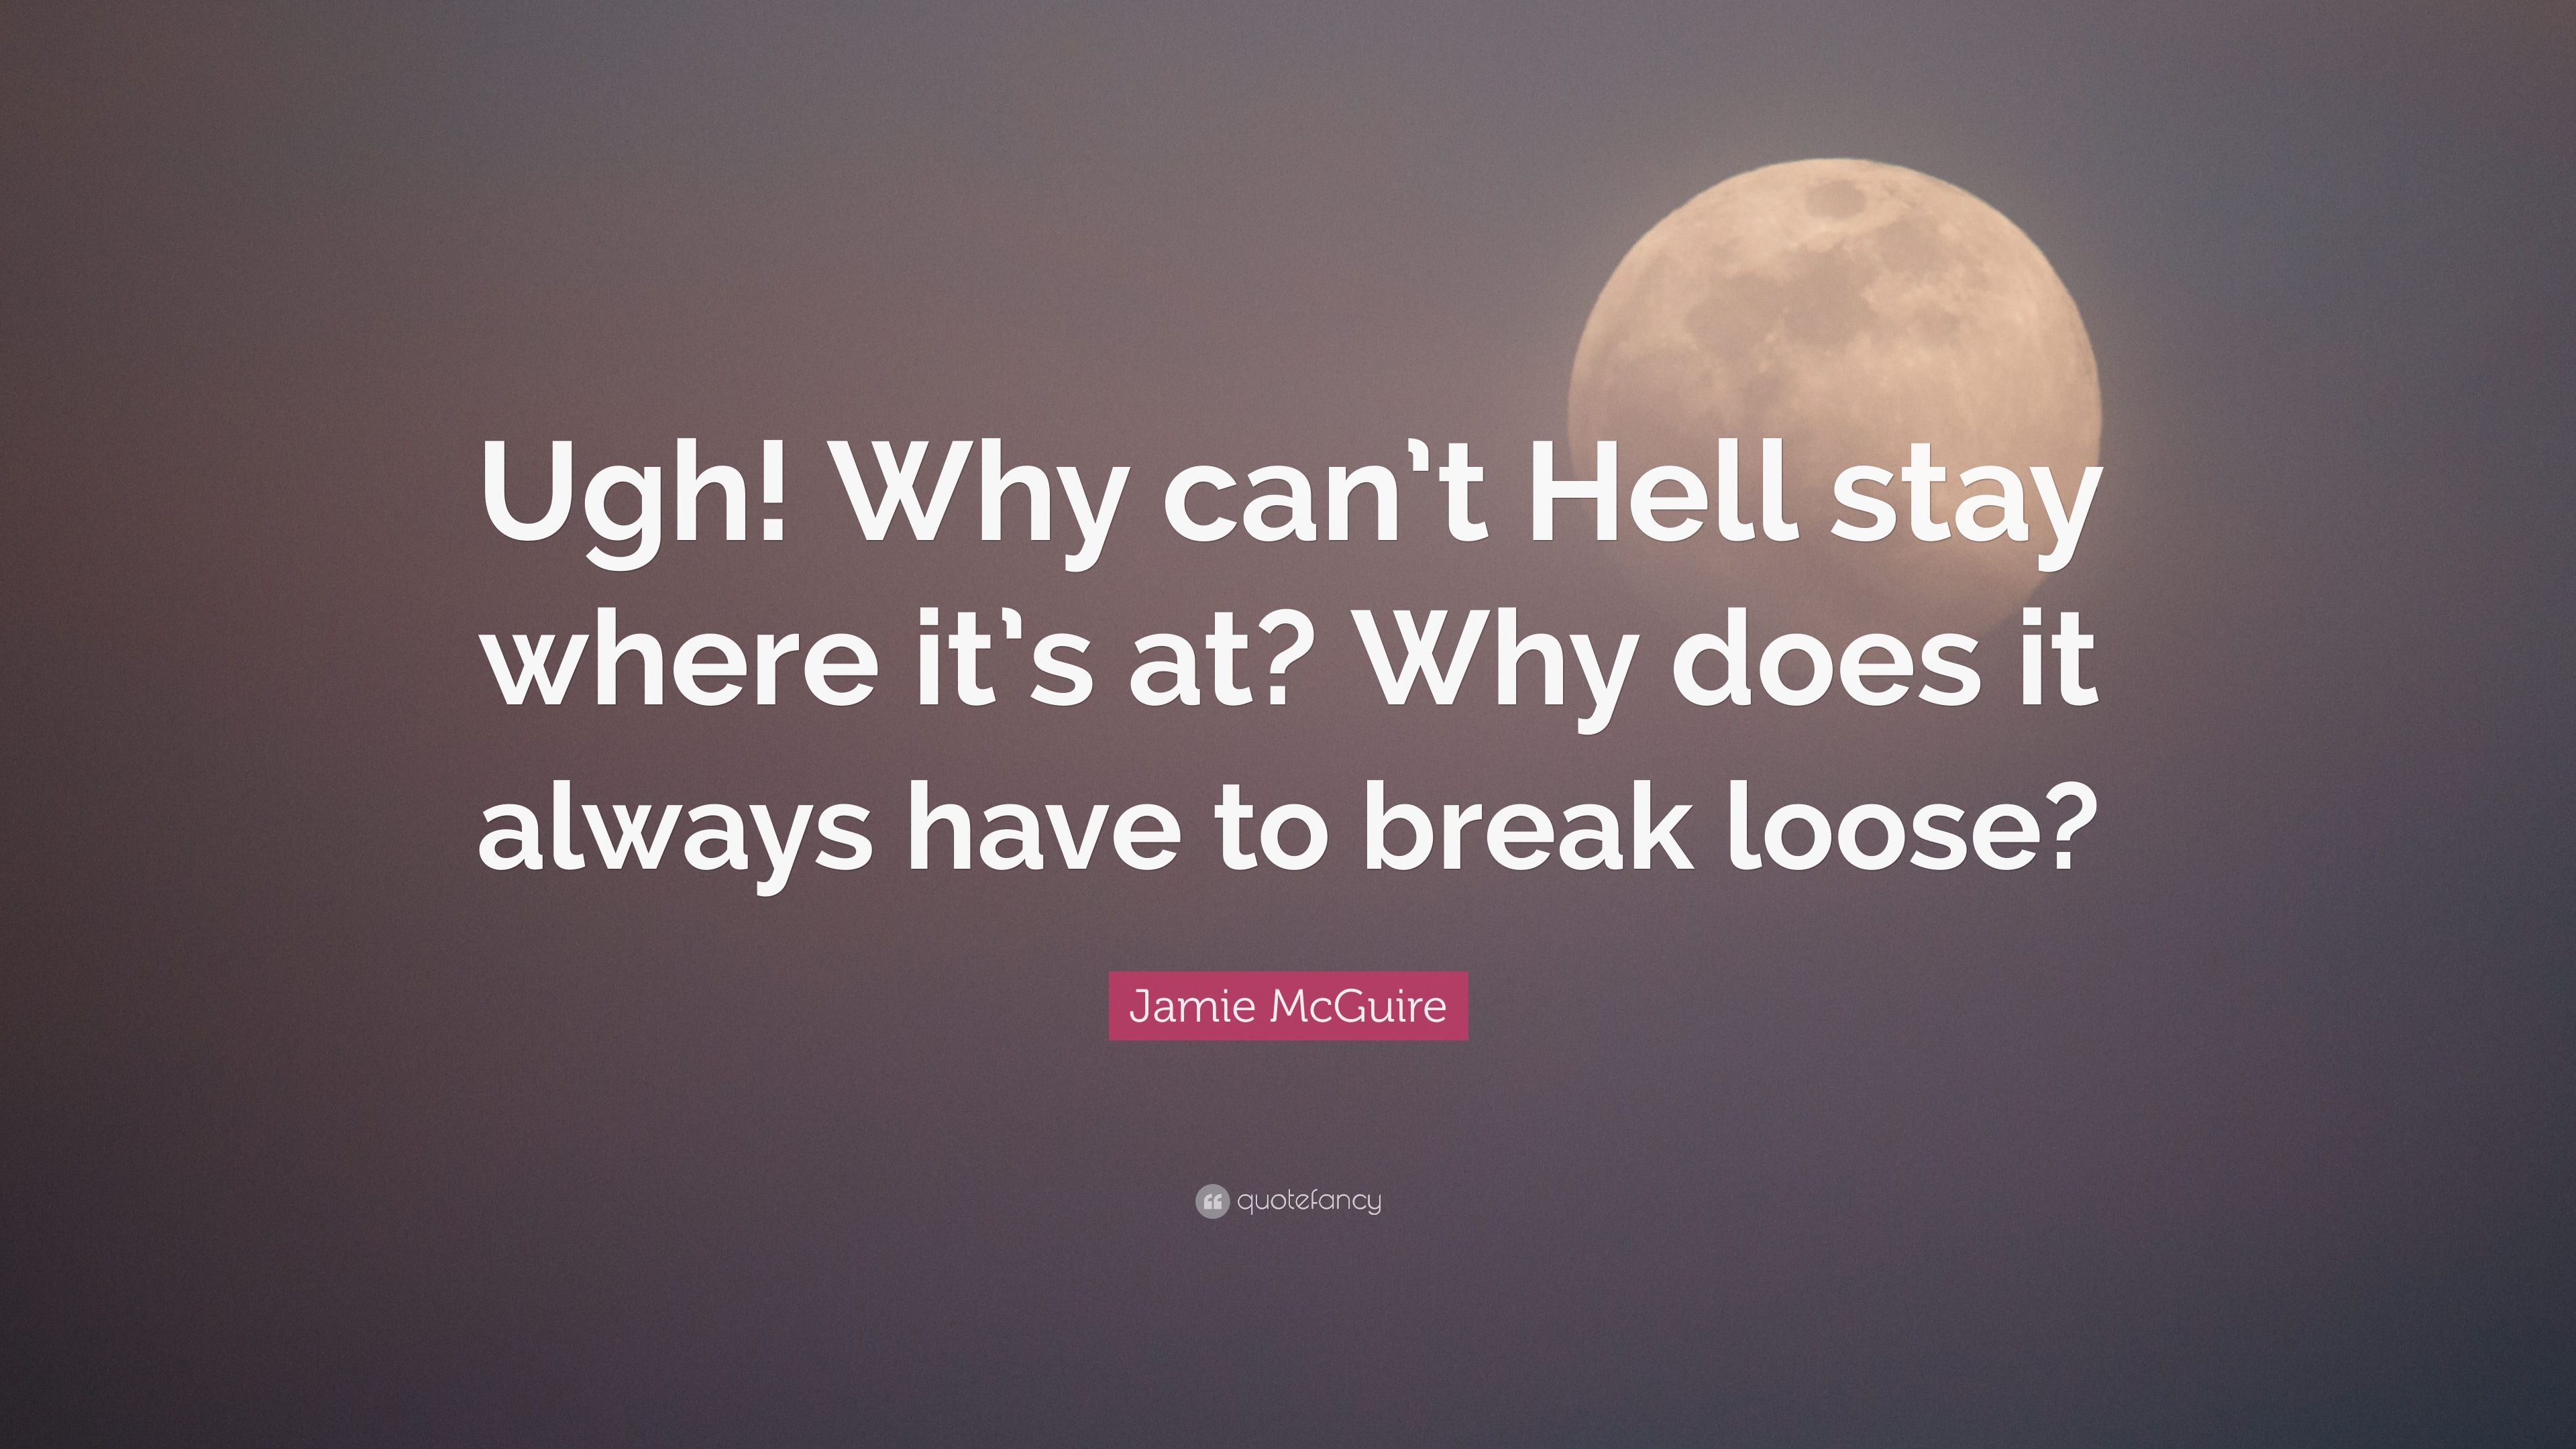 Jamie McGuire Quote: “Ugh! Why can't Hell stay where it's at? Why